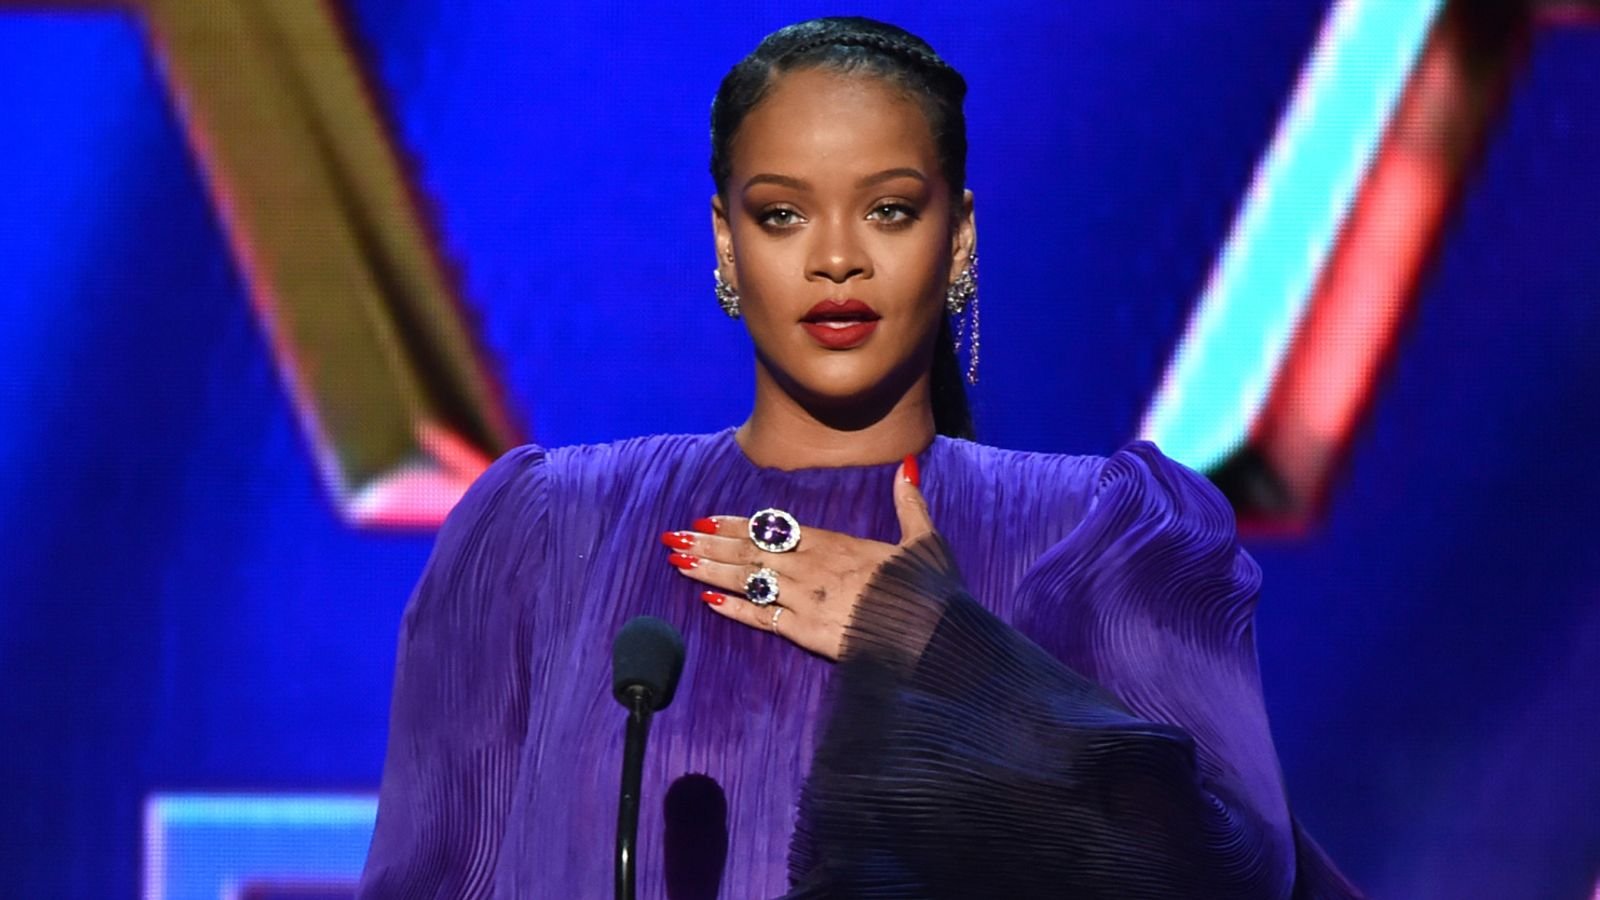 Rihanna became a billionaire and is now the richest musician in the world